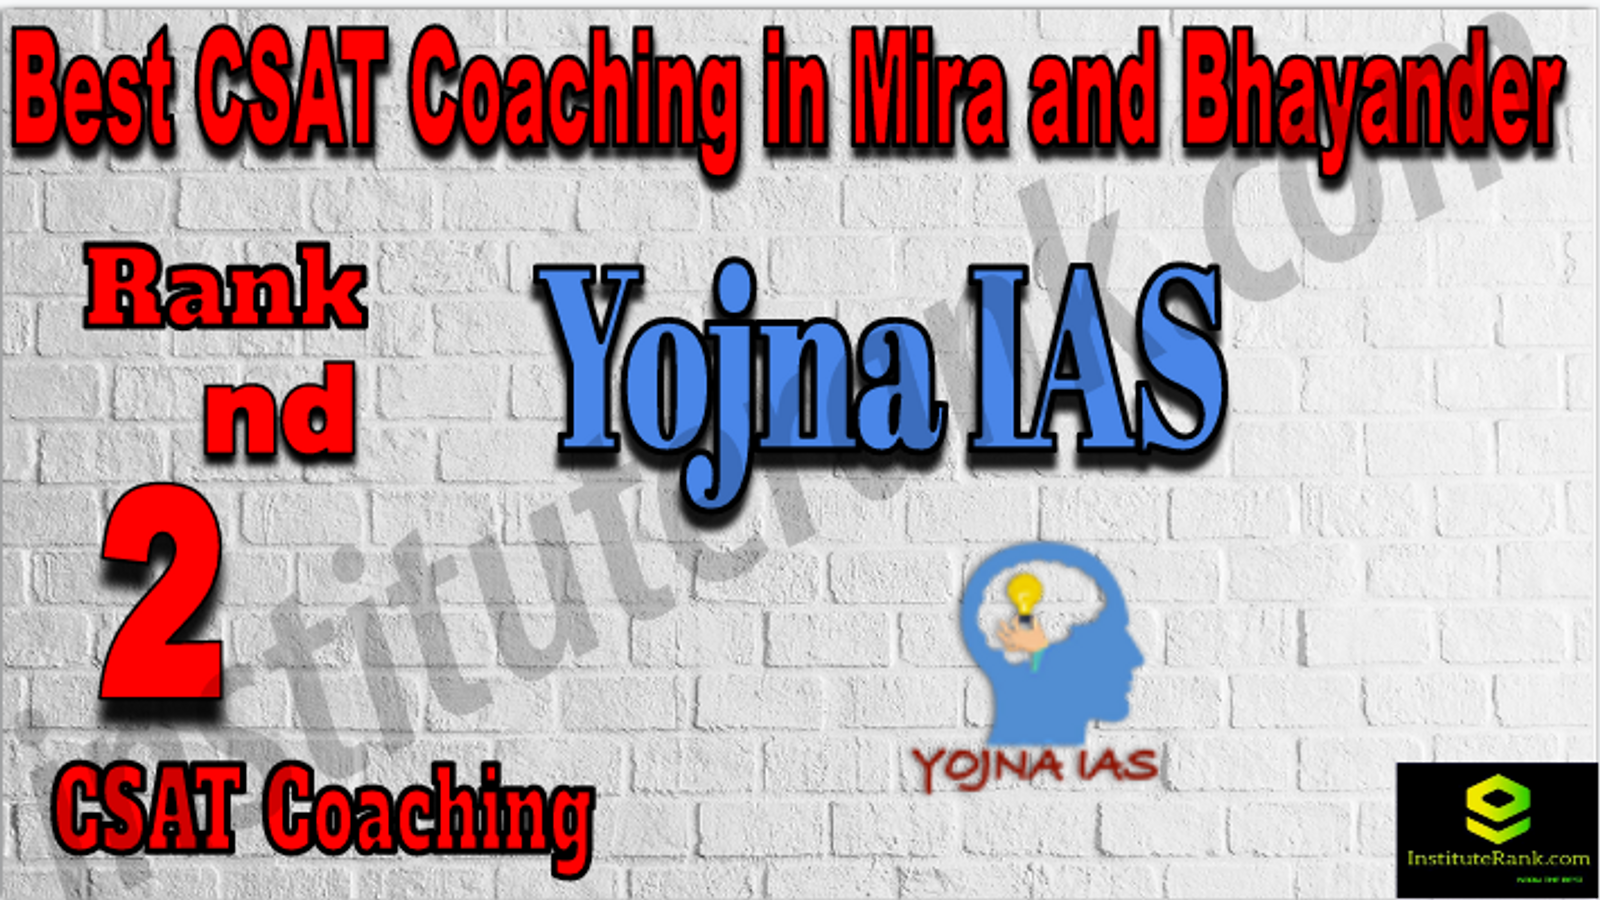 2ND CSAT Coaching in Mira and Bhayander